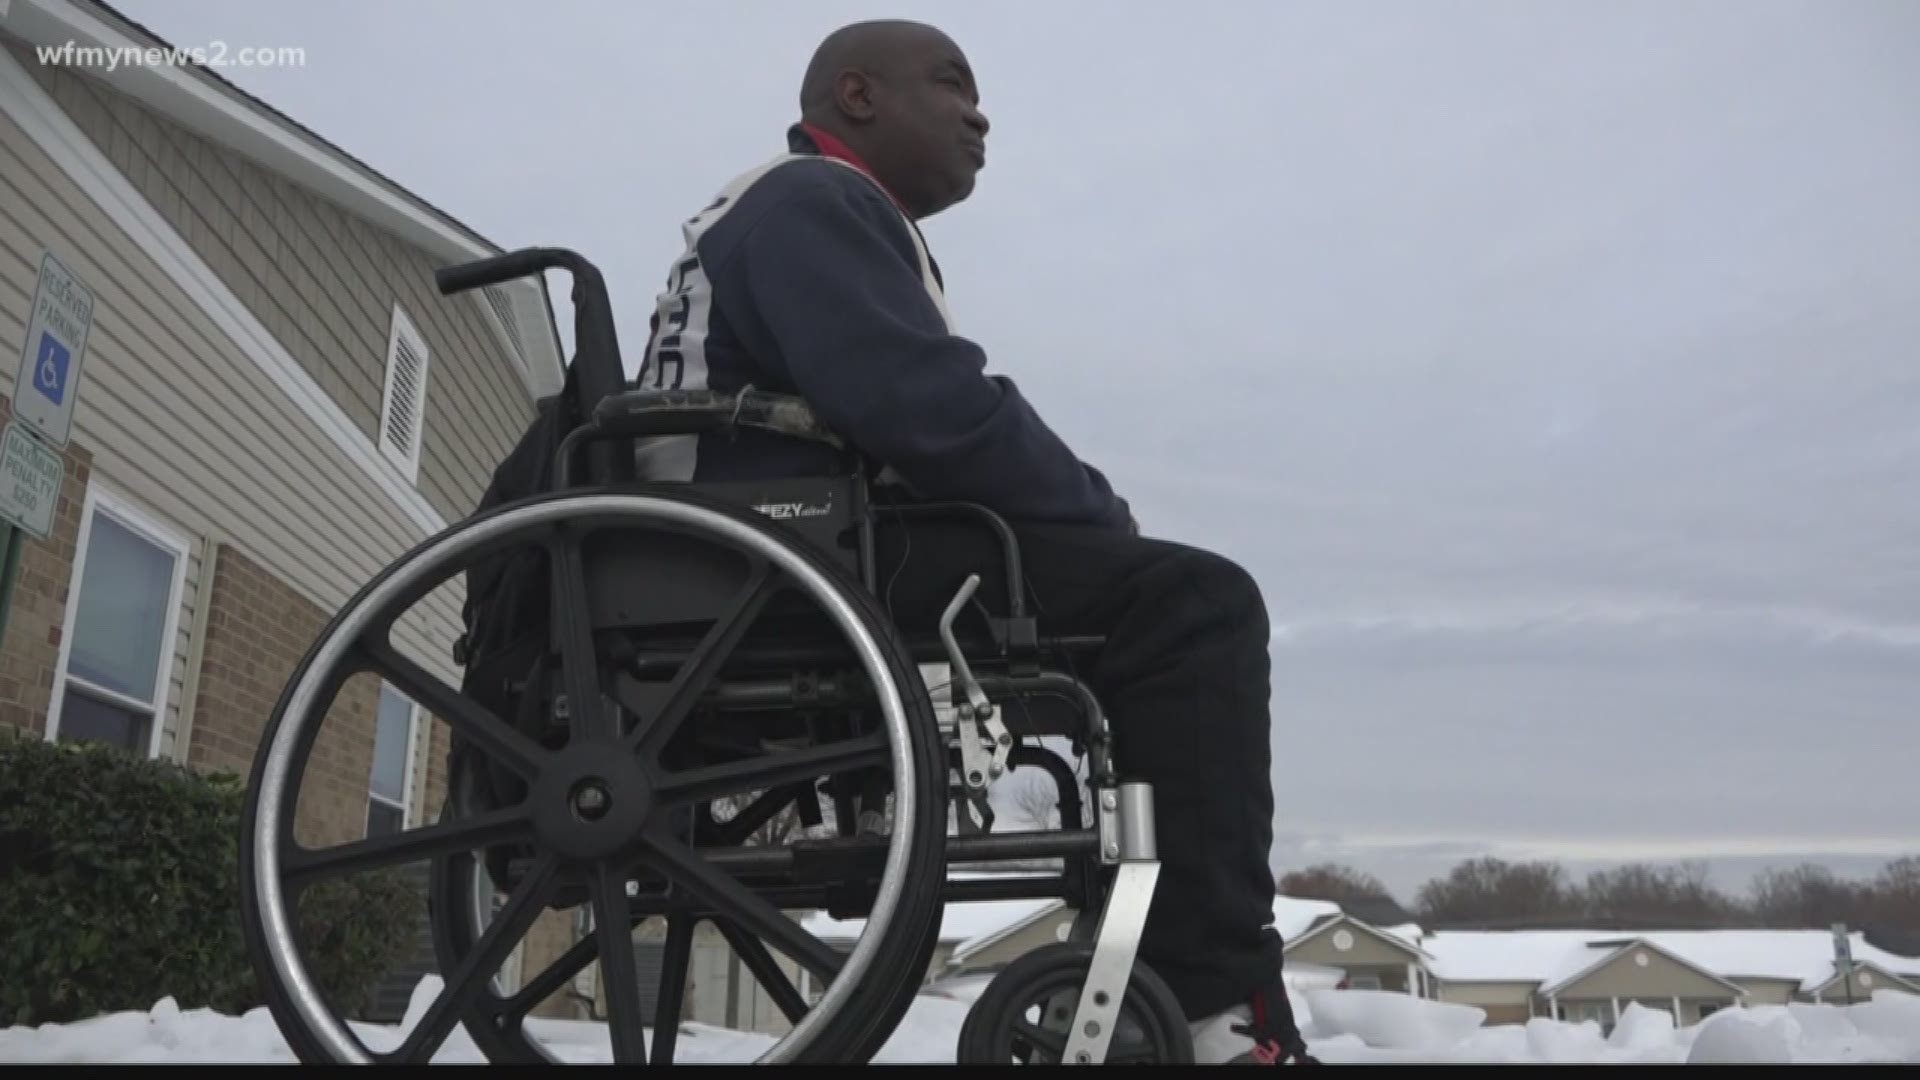 Greensboro firefighters helped a man in a wheelchair shovel snow.